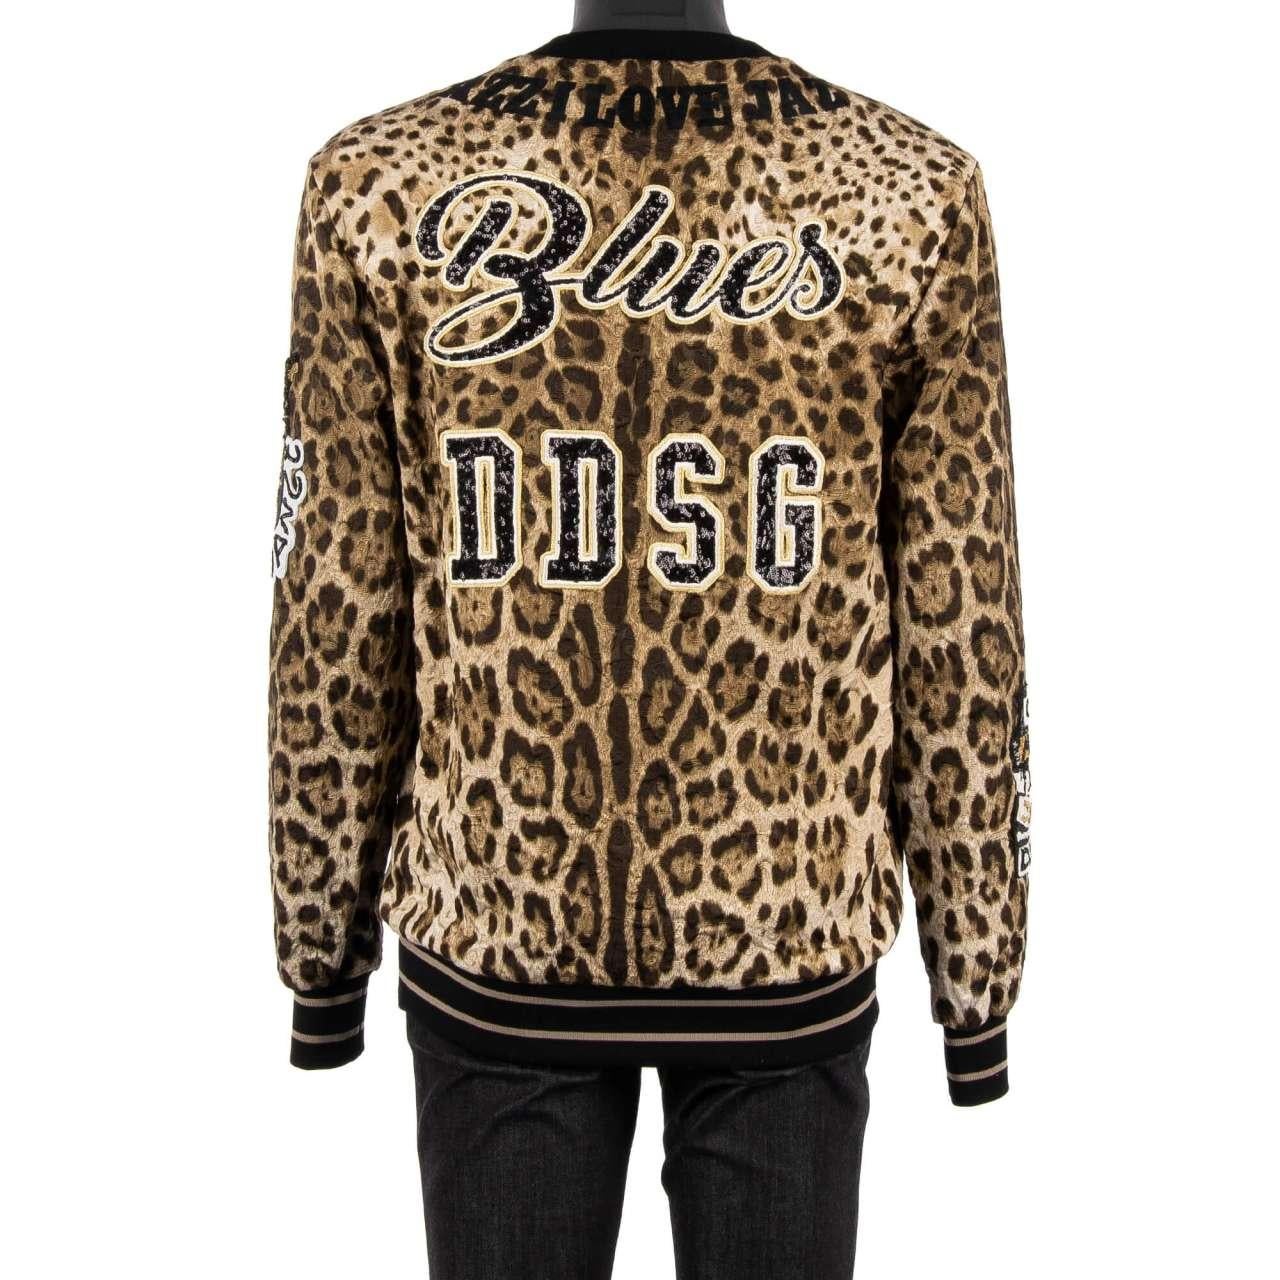 - Leopard printed, hand embroidered brocade sweater / sweatshirt with Jazz, Blues, Samba Music motive embroidery by DOLCE & GABBANA - RUNWAY - Dolce & Gabbana Fashion Show - New with Tags - Former RRP: EUR 3.950 - MADE IN ITALY - Regular cut -